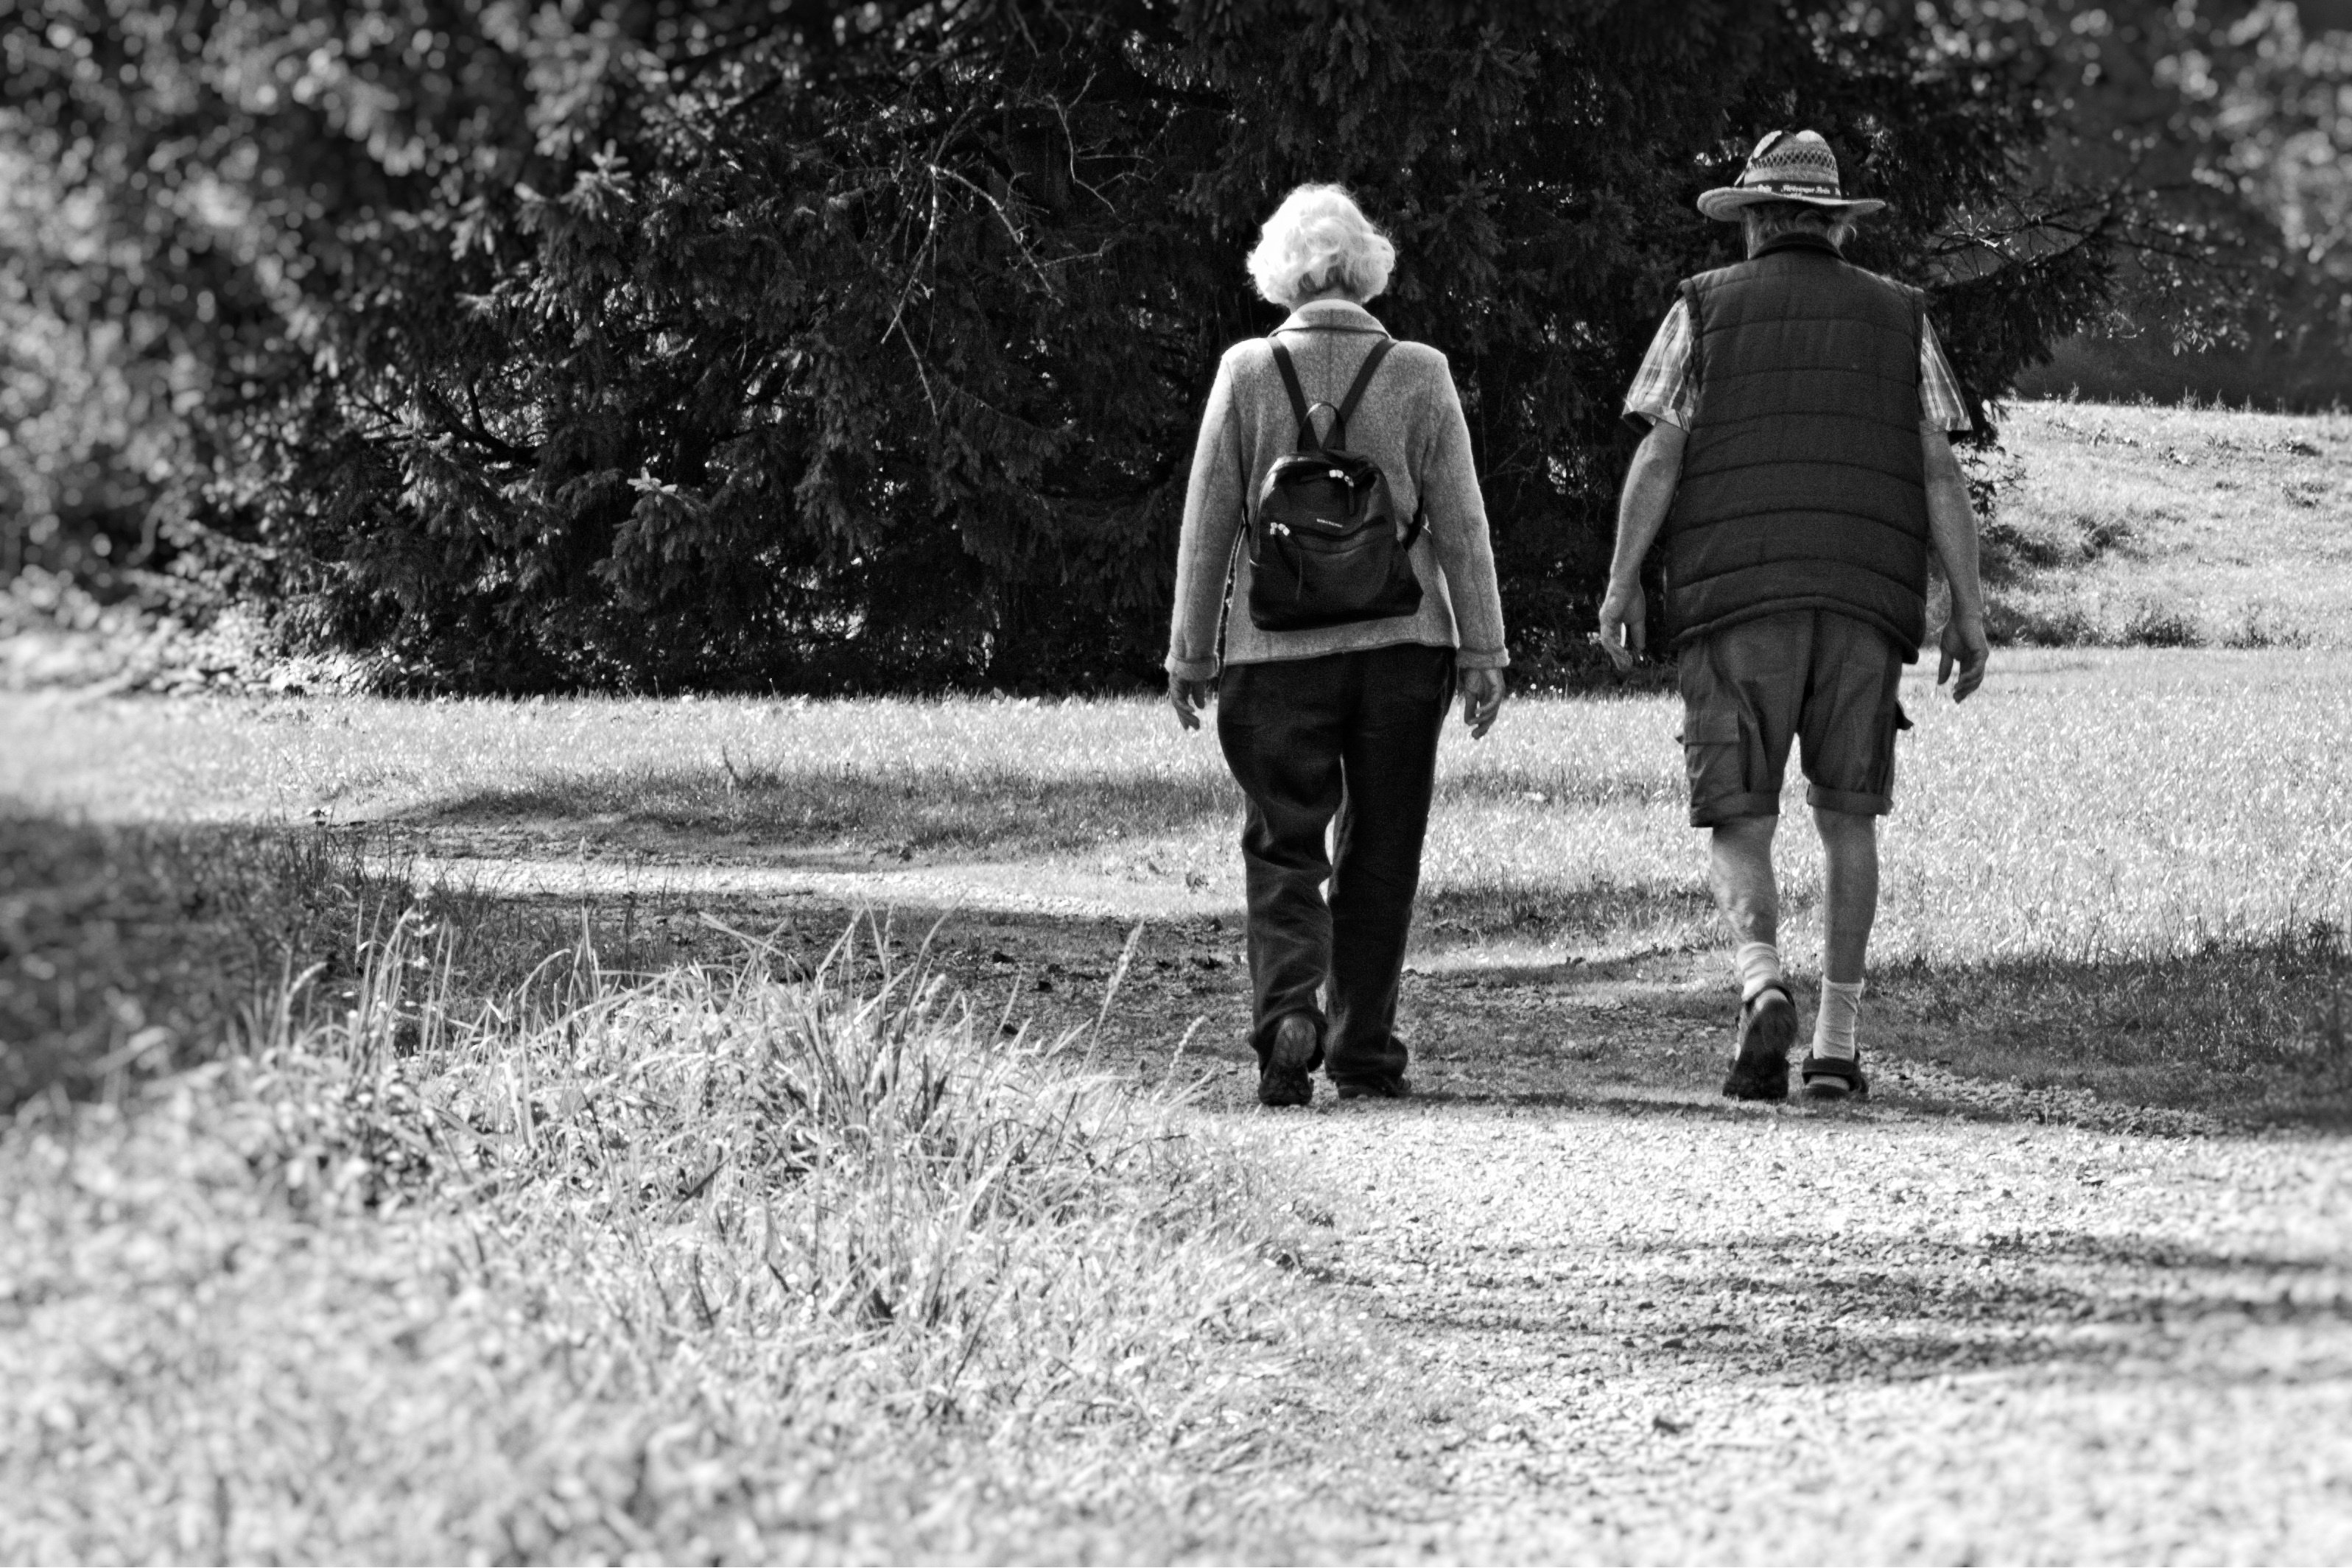 Man and woman walking down a path (black and white).